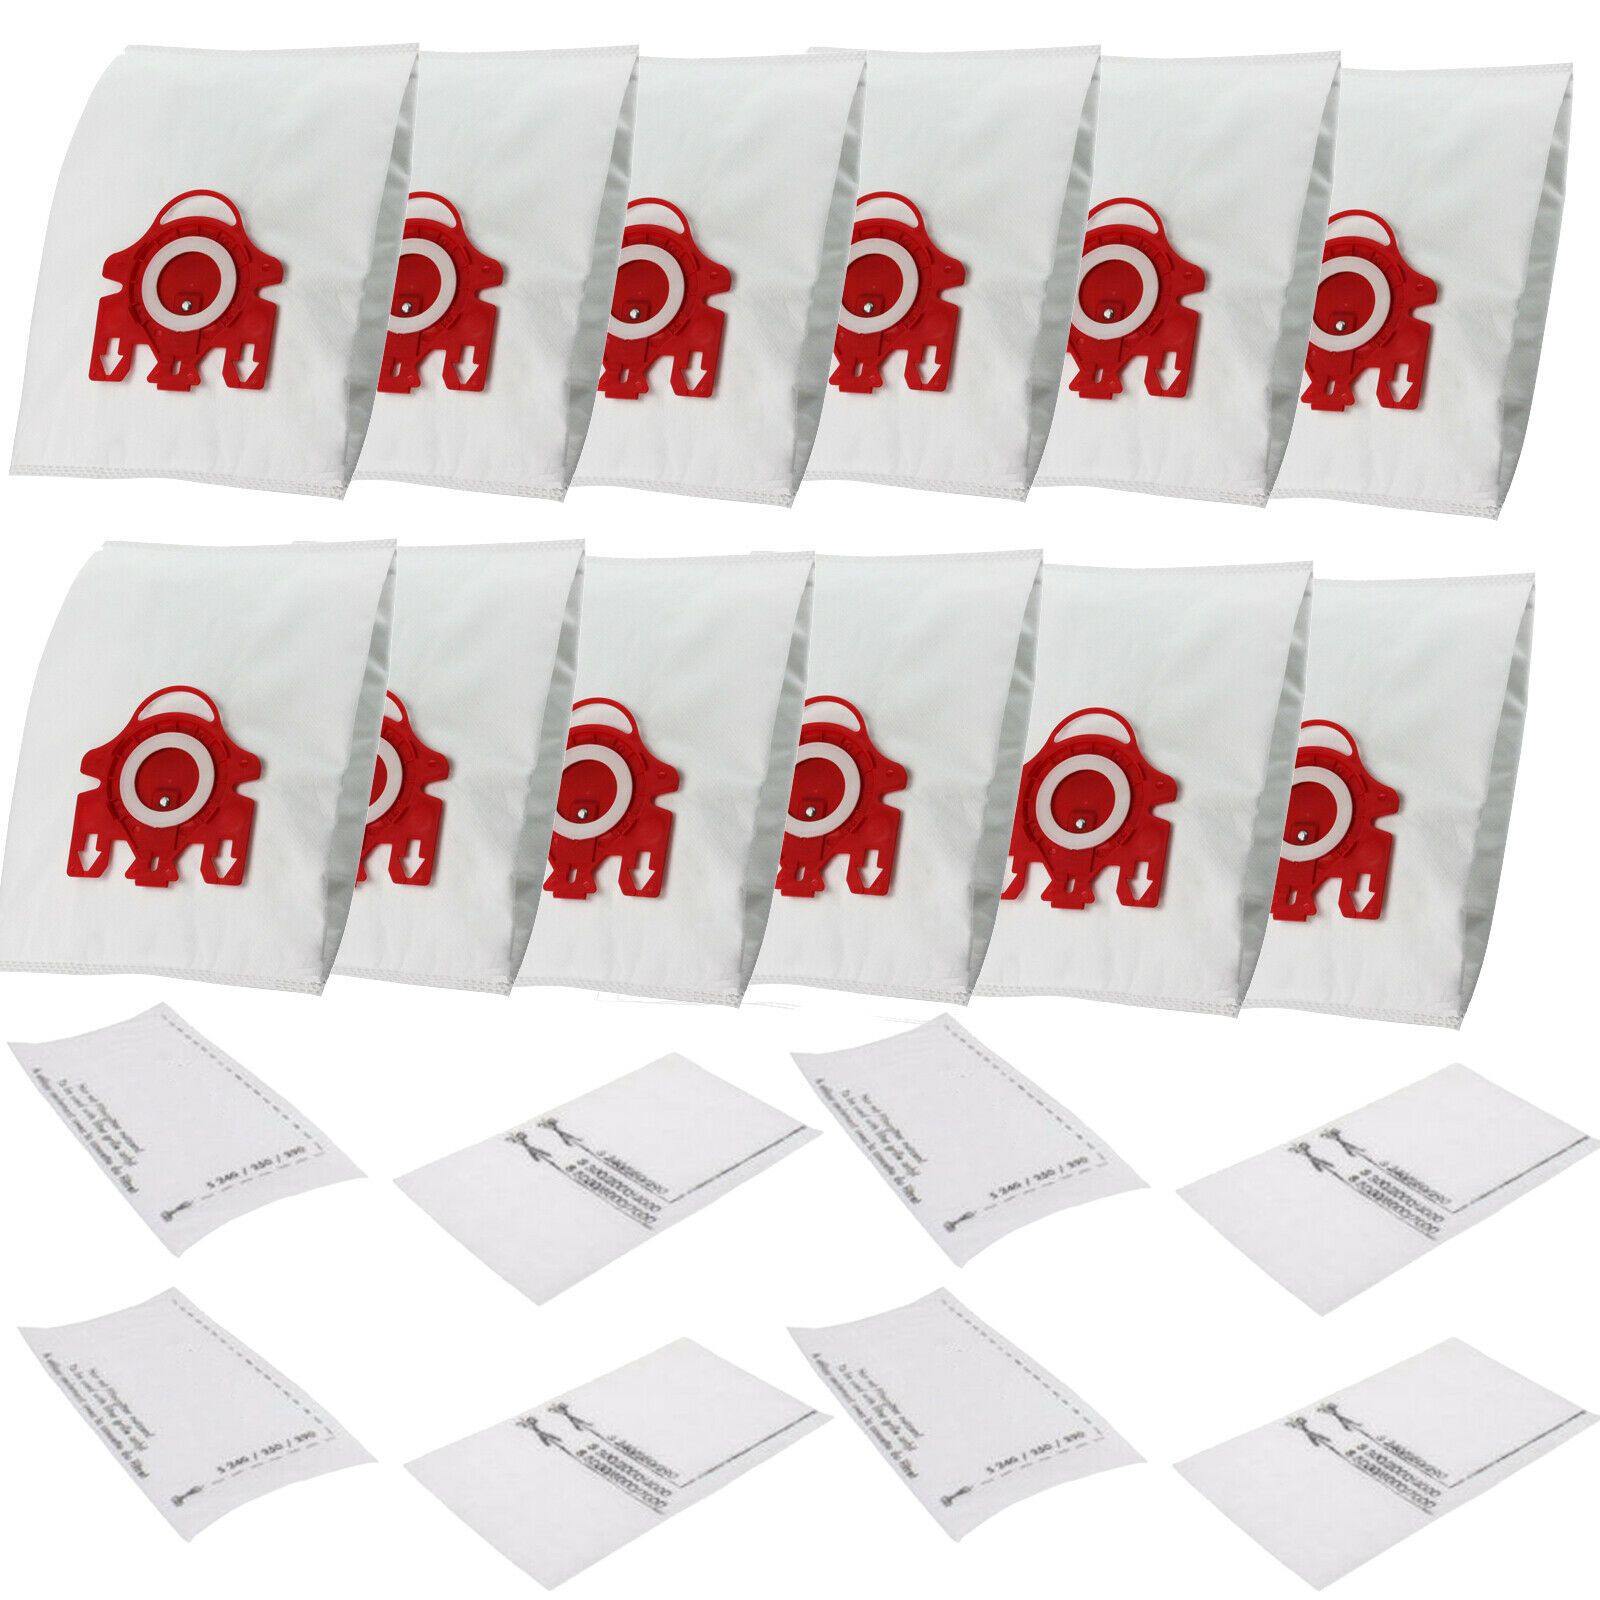 12 Dust Bags & 8 Filters For Miele FJM Hyclean 3D COMPACT C1 C2 S4 S6 S290 S381 Sparesbarn